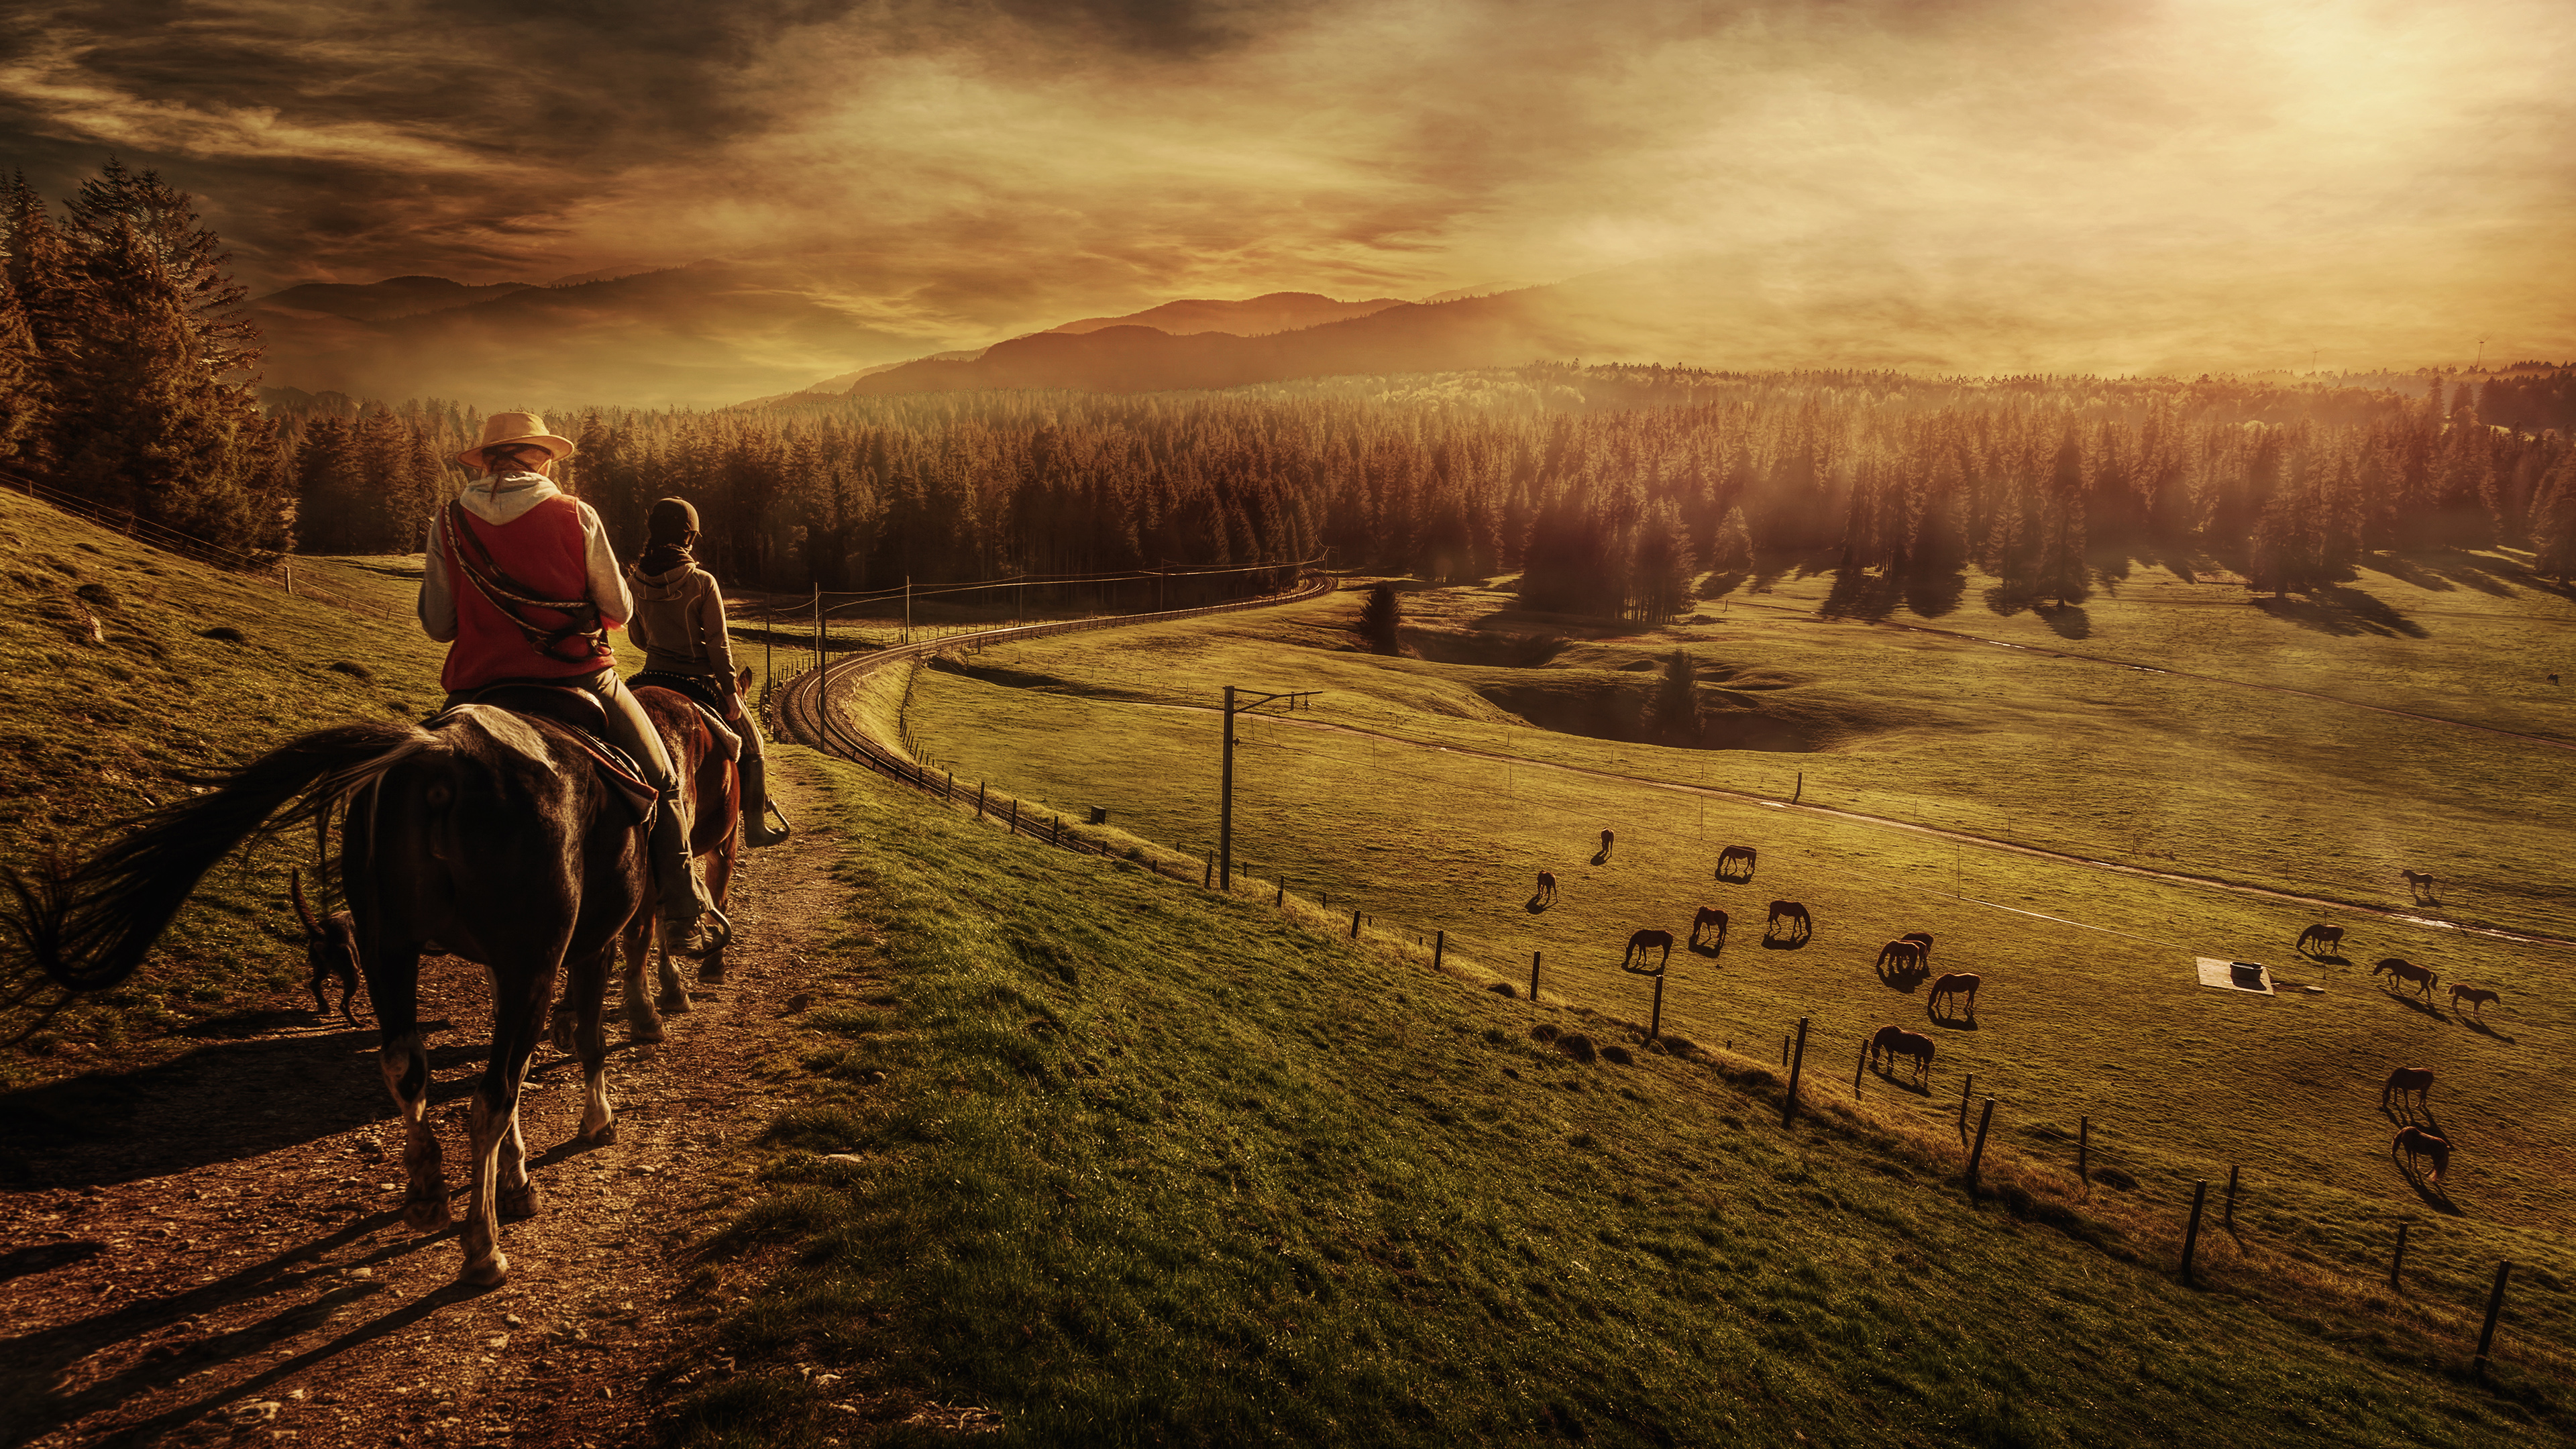 sunset, people, landscape, photography, horse, horse riding Full HD